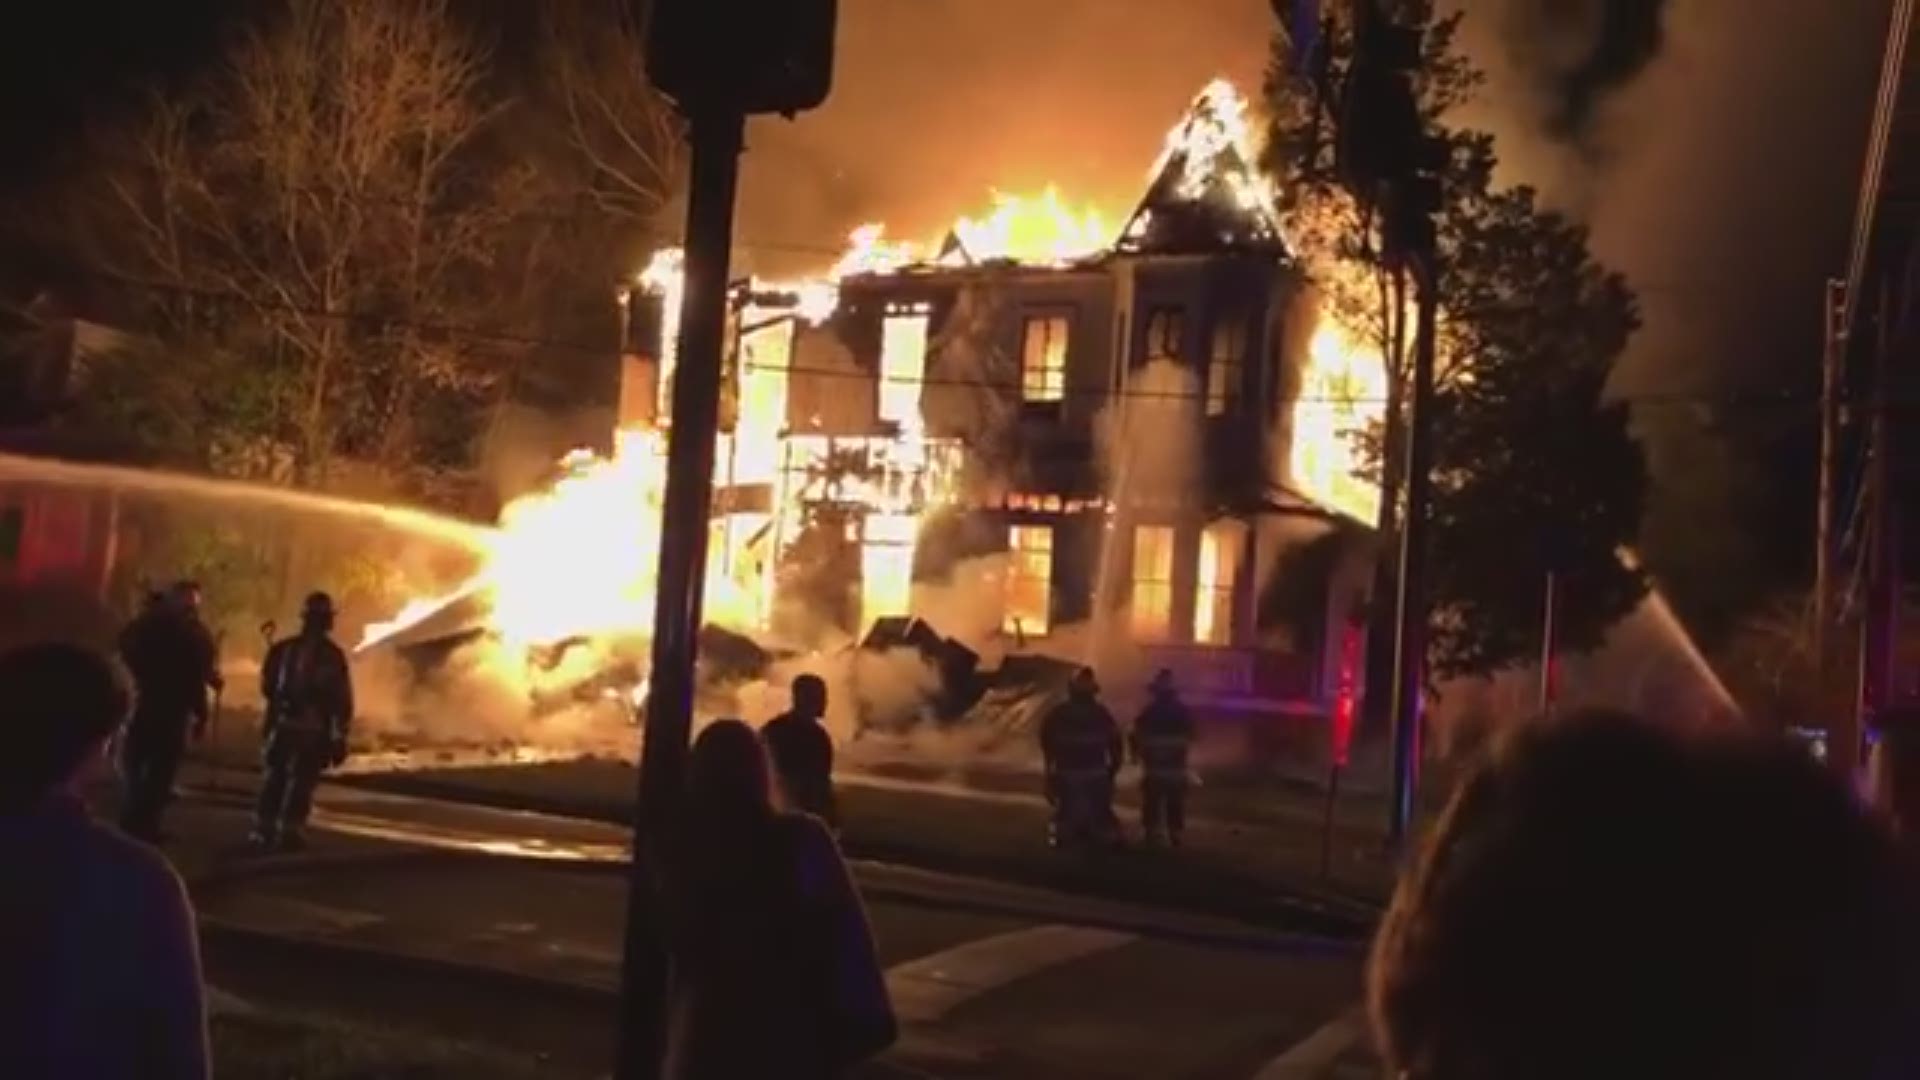 Video of the fire is courtesy of Edwin Atkins